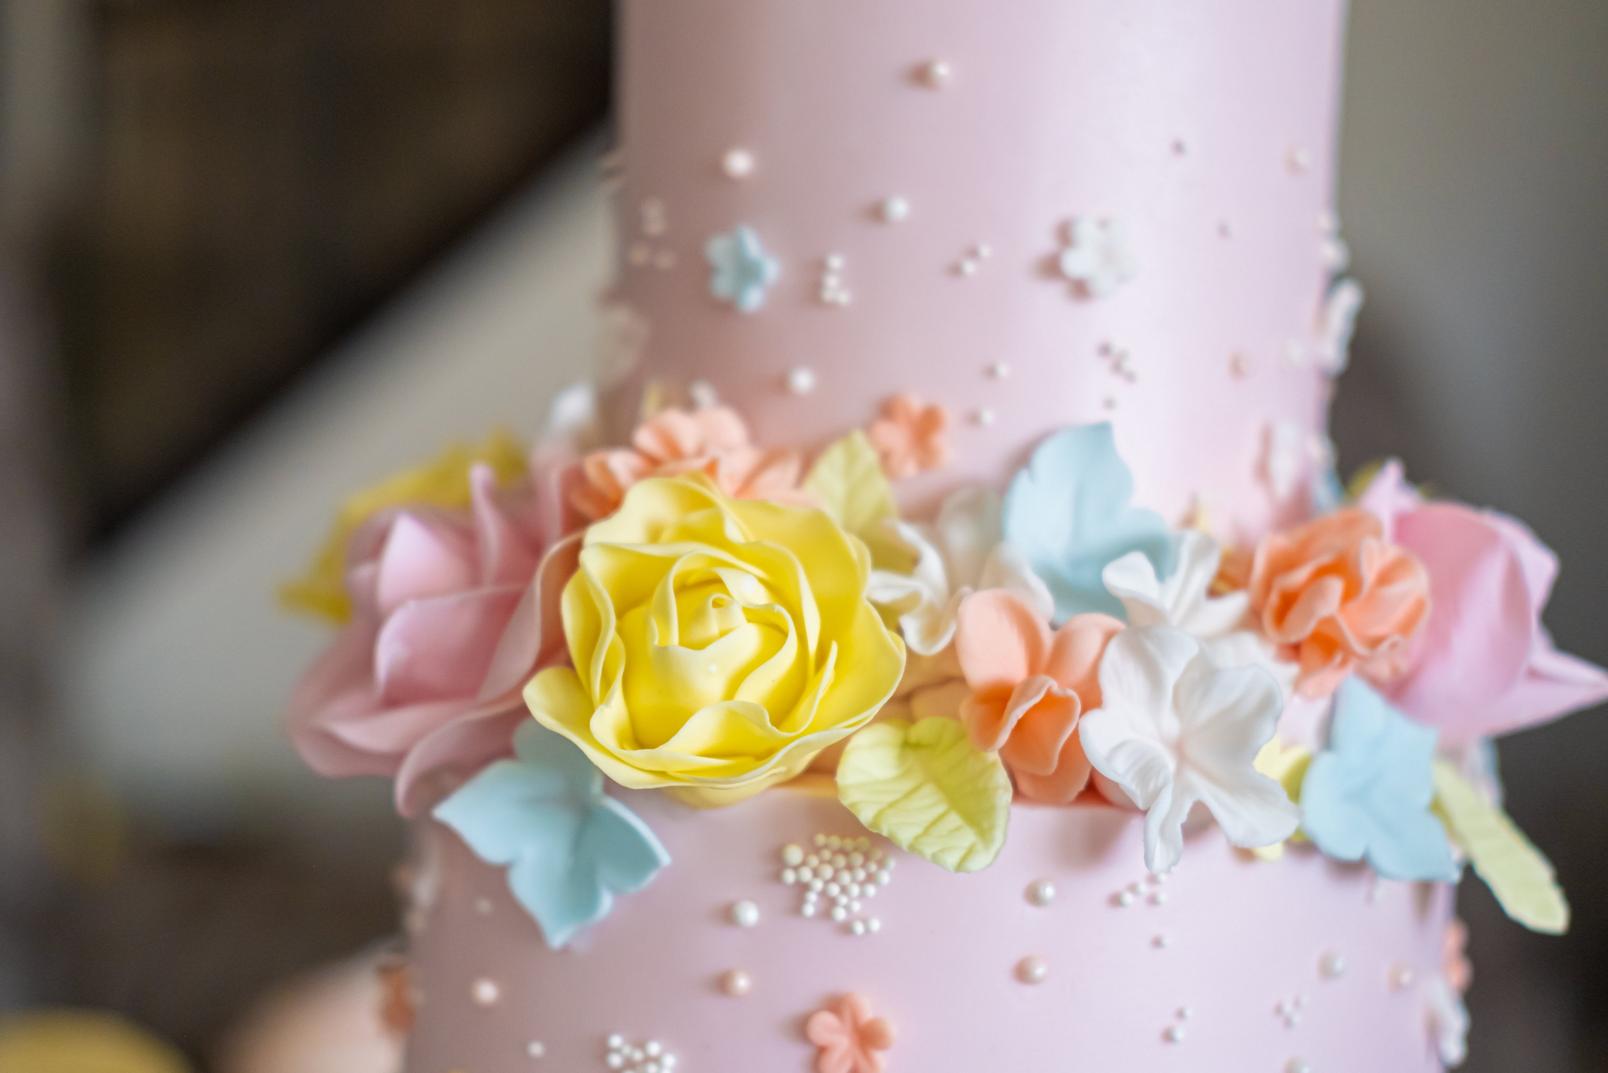 Extensive Collection of Flower Birthday Cake Images: Top 999+ Stunning Full 4K Photos